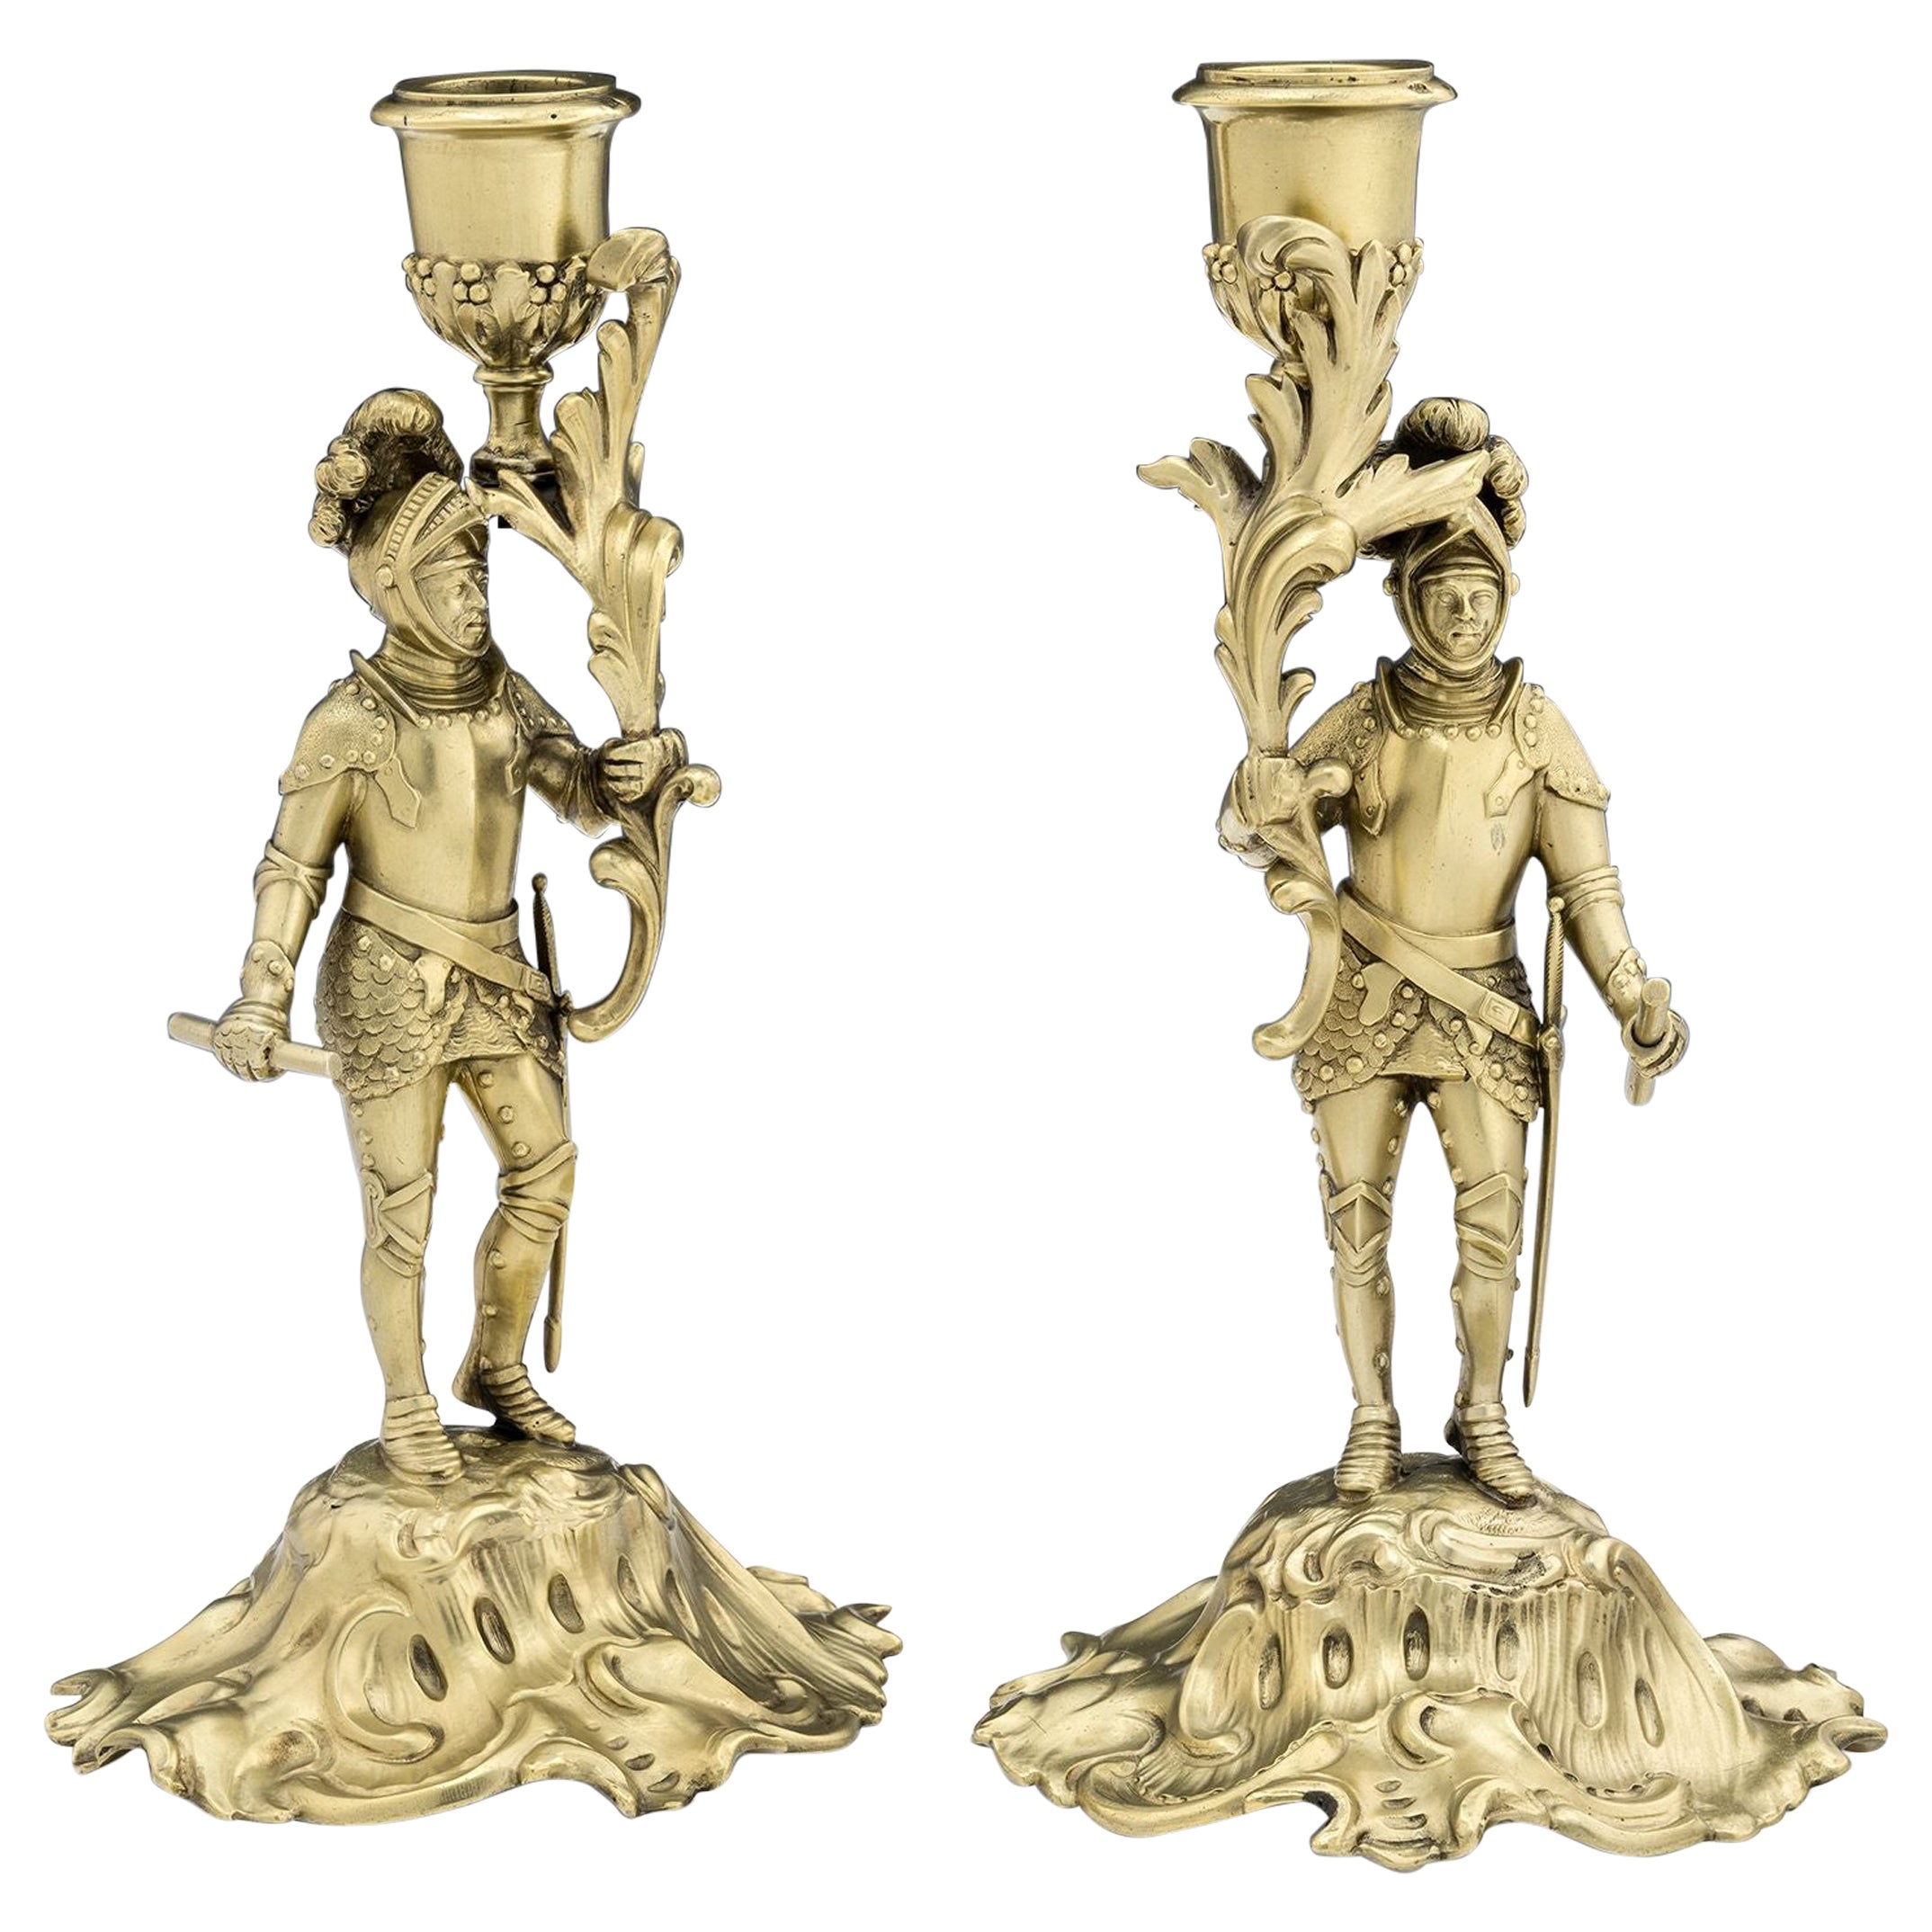 Pair of Silver Gilt Cast Candlesticks, London, 1847, by C T & G Fox